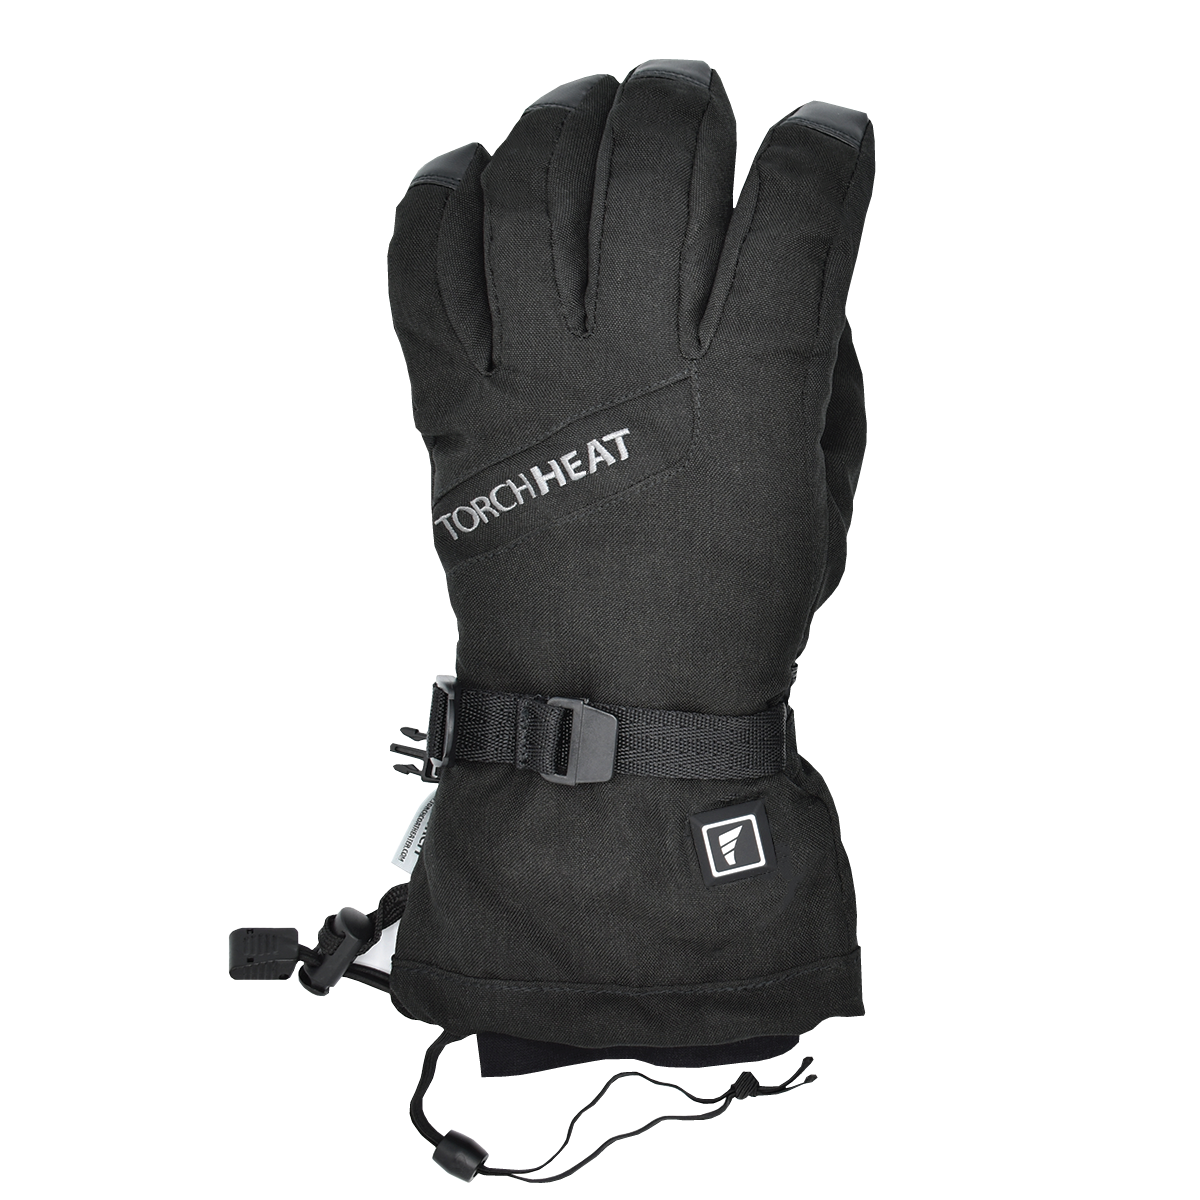 the torch electrek revolt heated gloves are stylish and functional with a power button, full hand heating, 3 heat settings, wrist buckle, leash, and cuff strap to keep the heat in and cold out